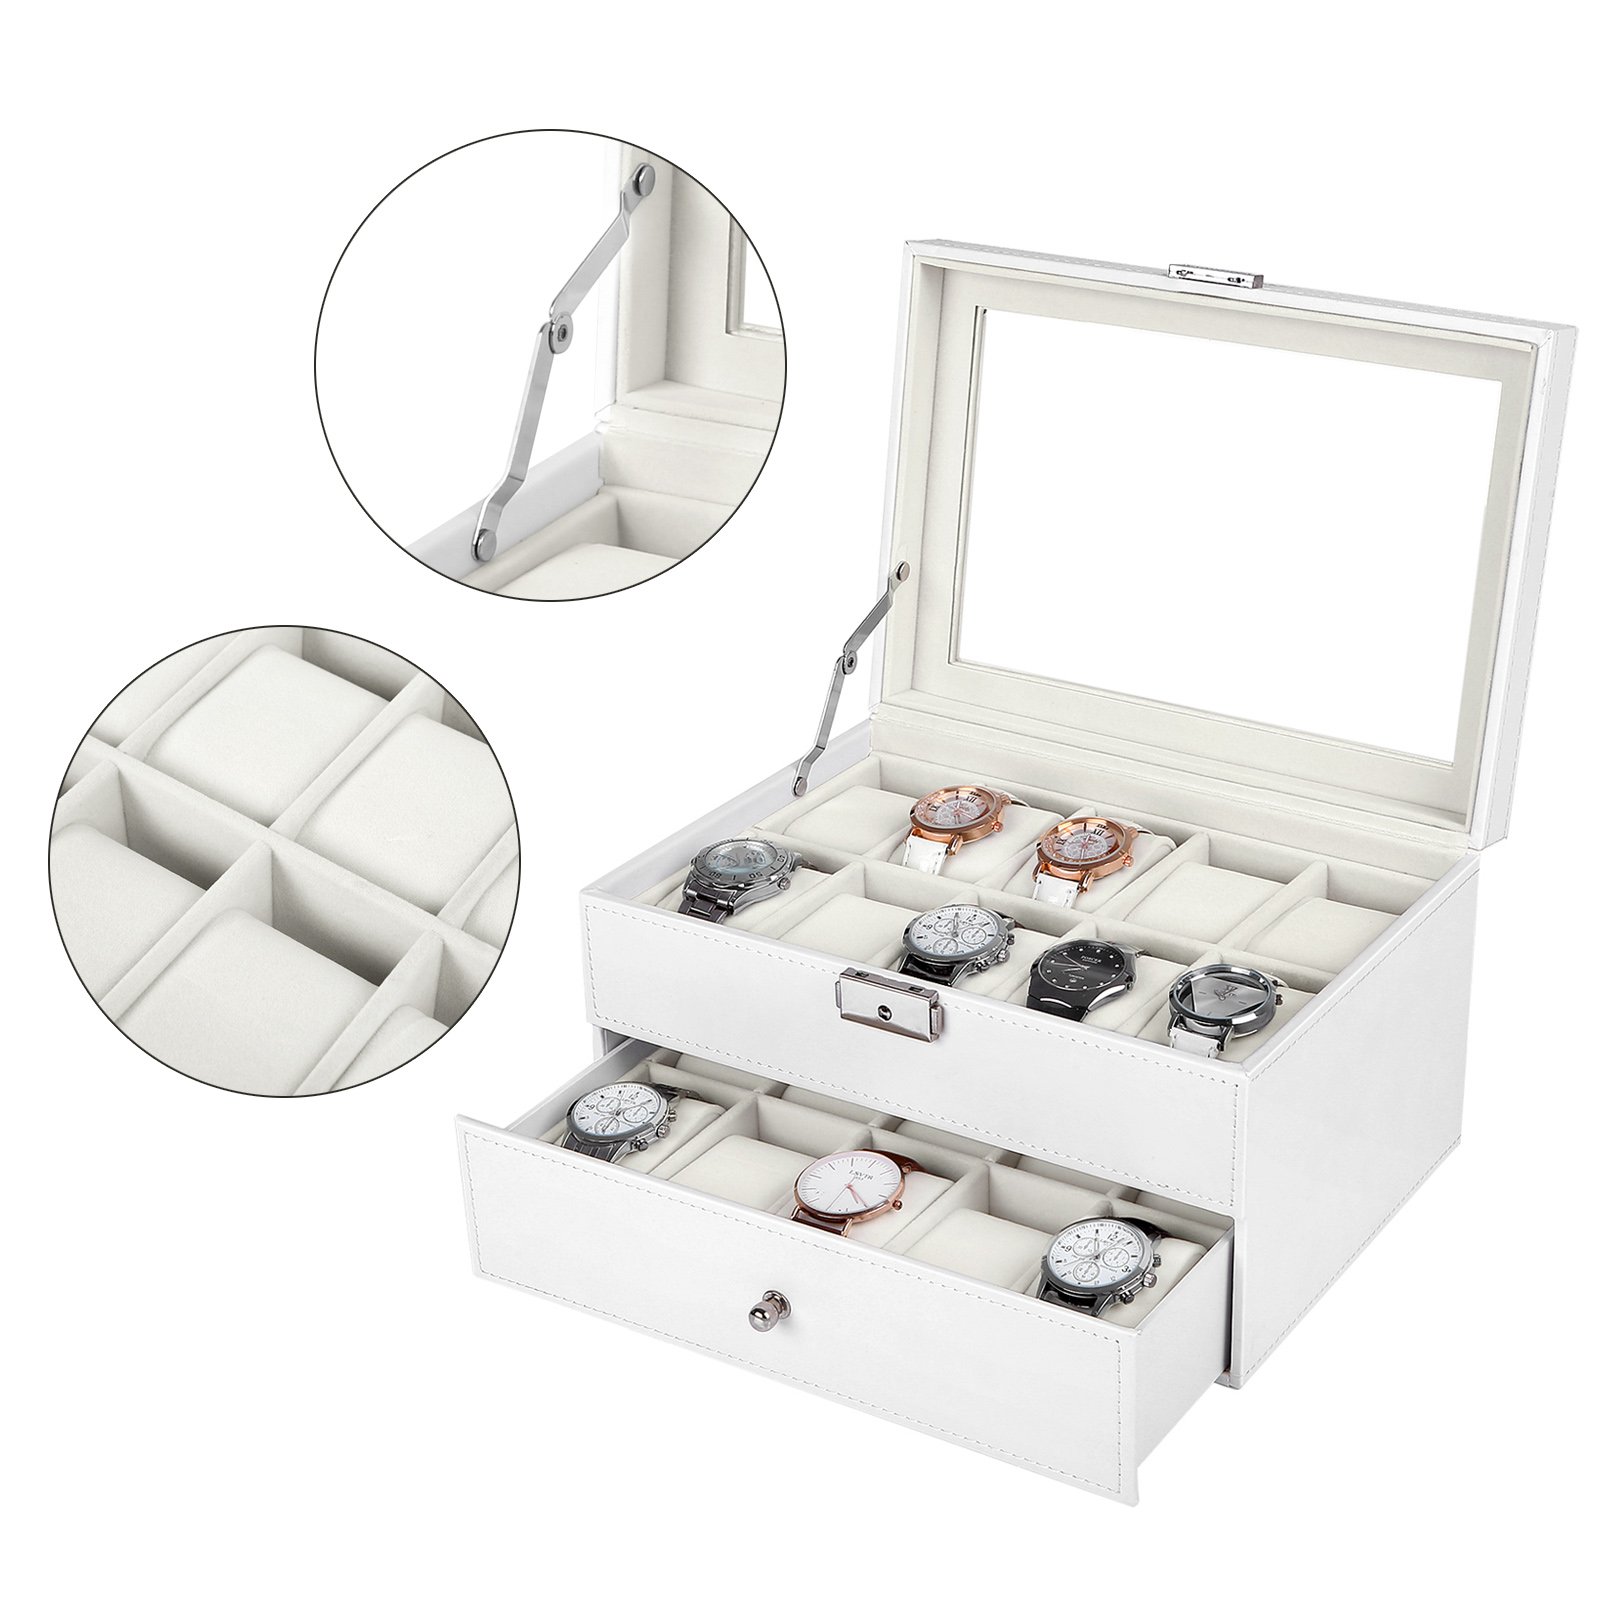 SONGMICS 20 Watch Box Lockable Organizer Display Case with Glass Top White